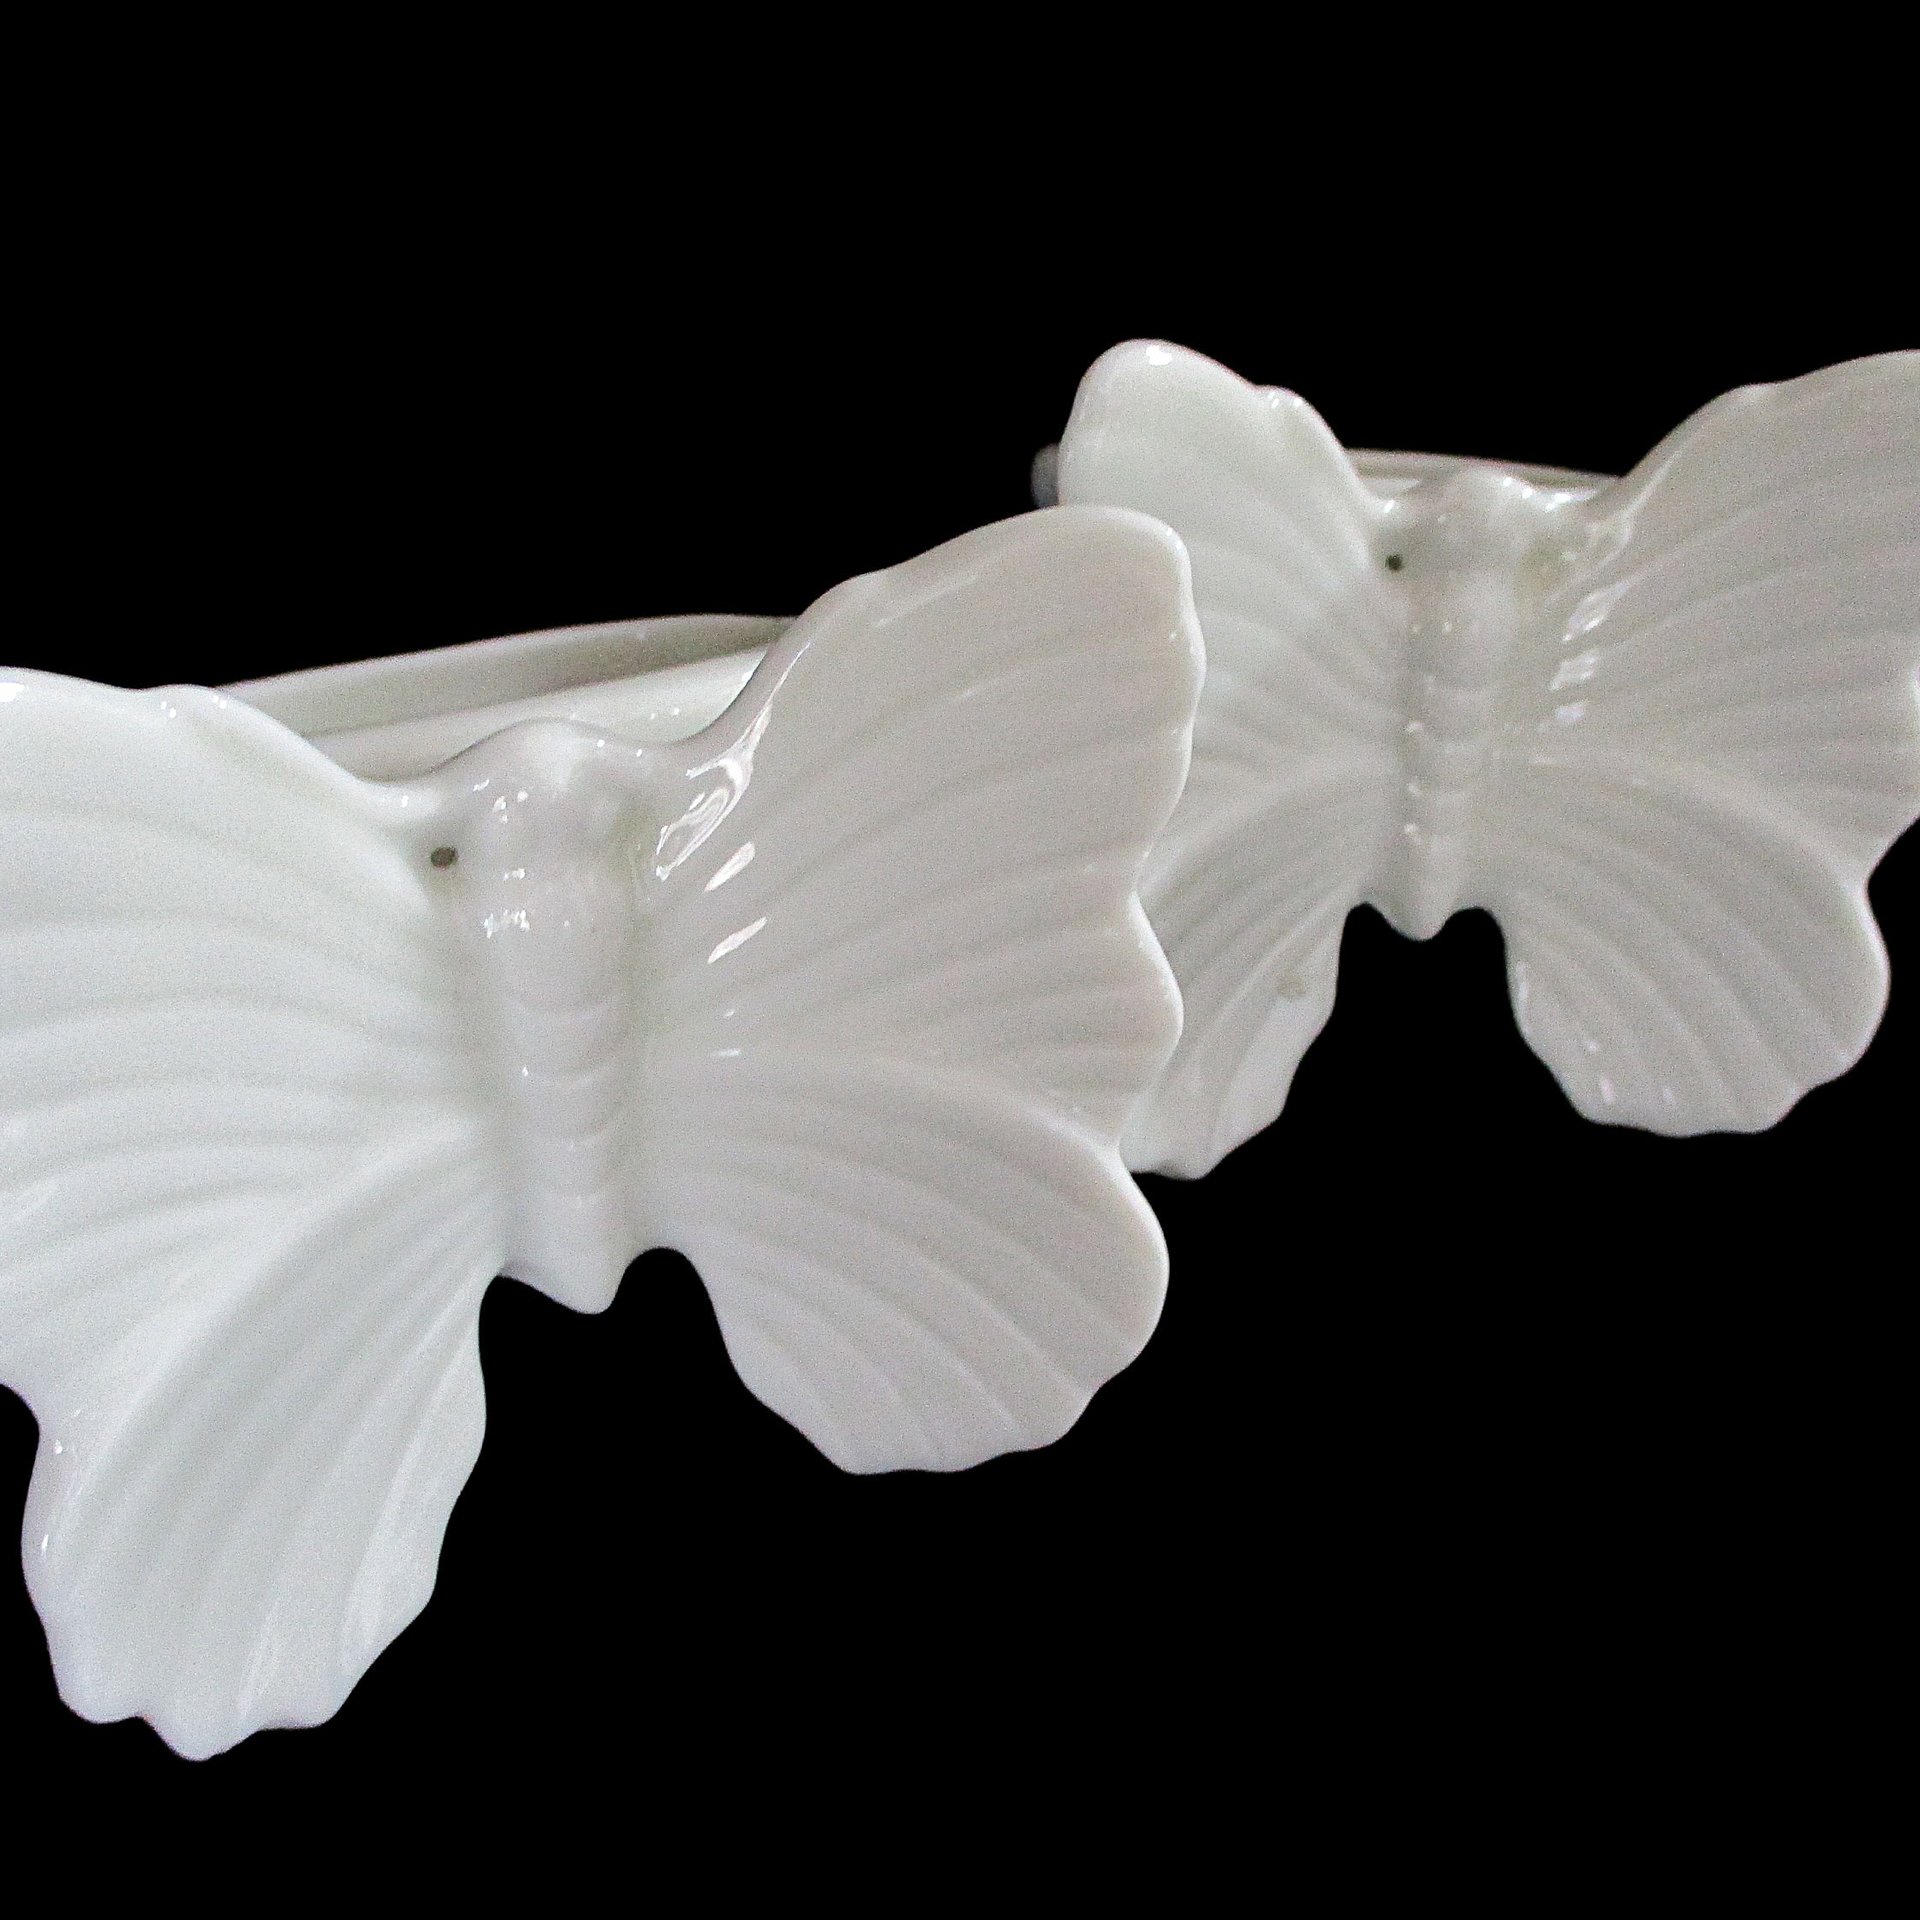 Butterfly Napkin Rings or Holders, Fitz and Floyd, White Butterfly Tablescaping, Set of 2, Wonderful Condition